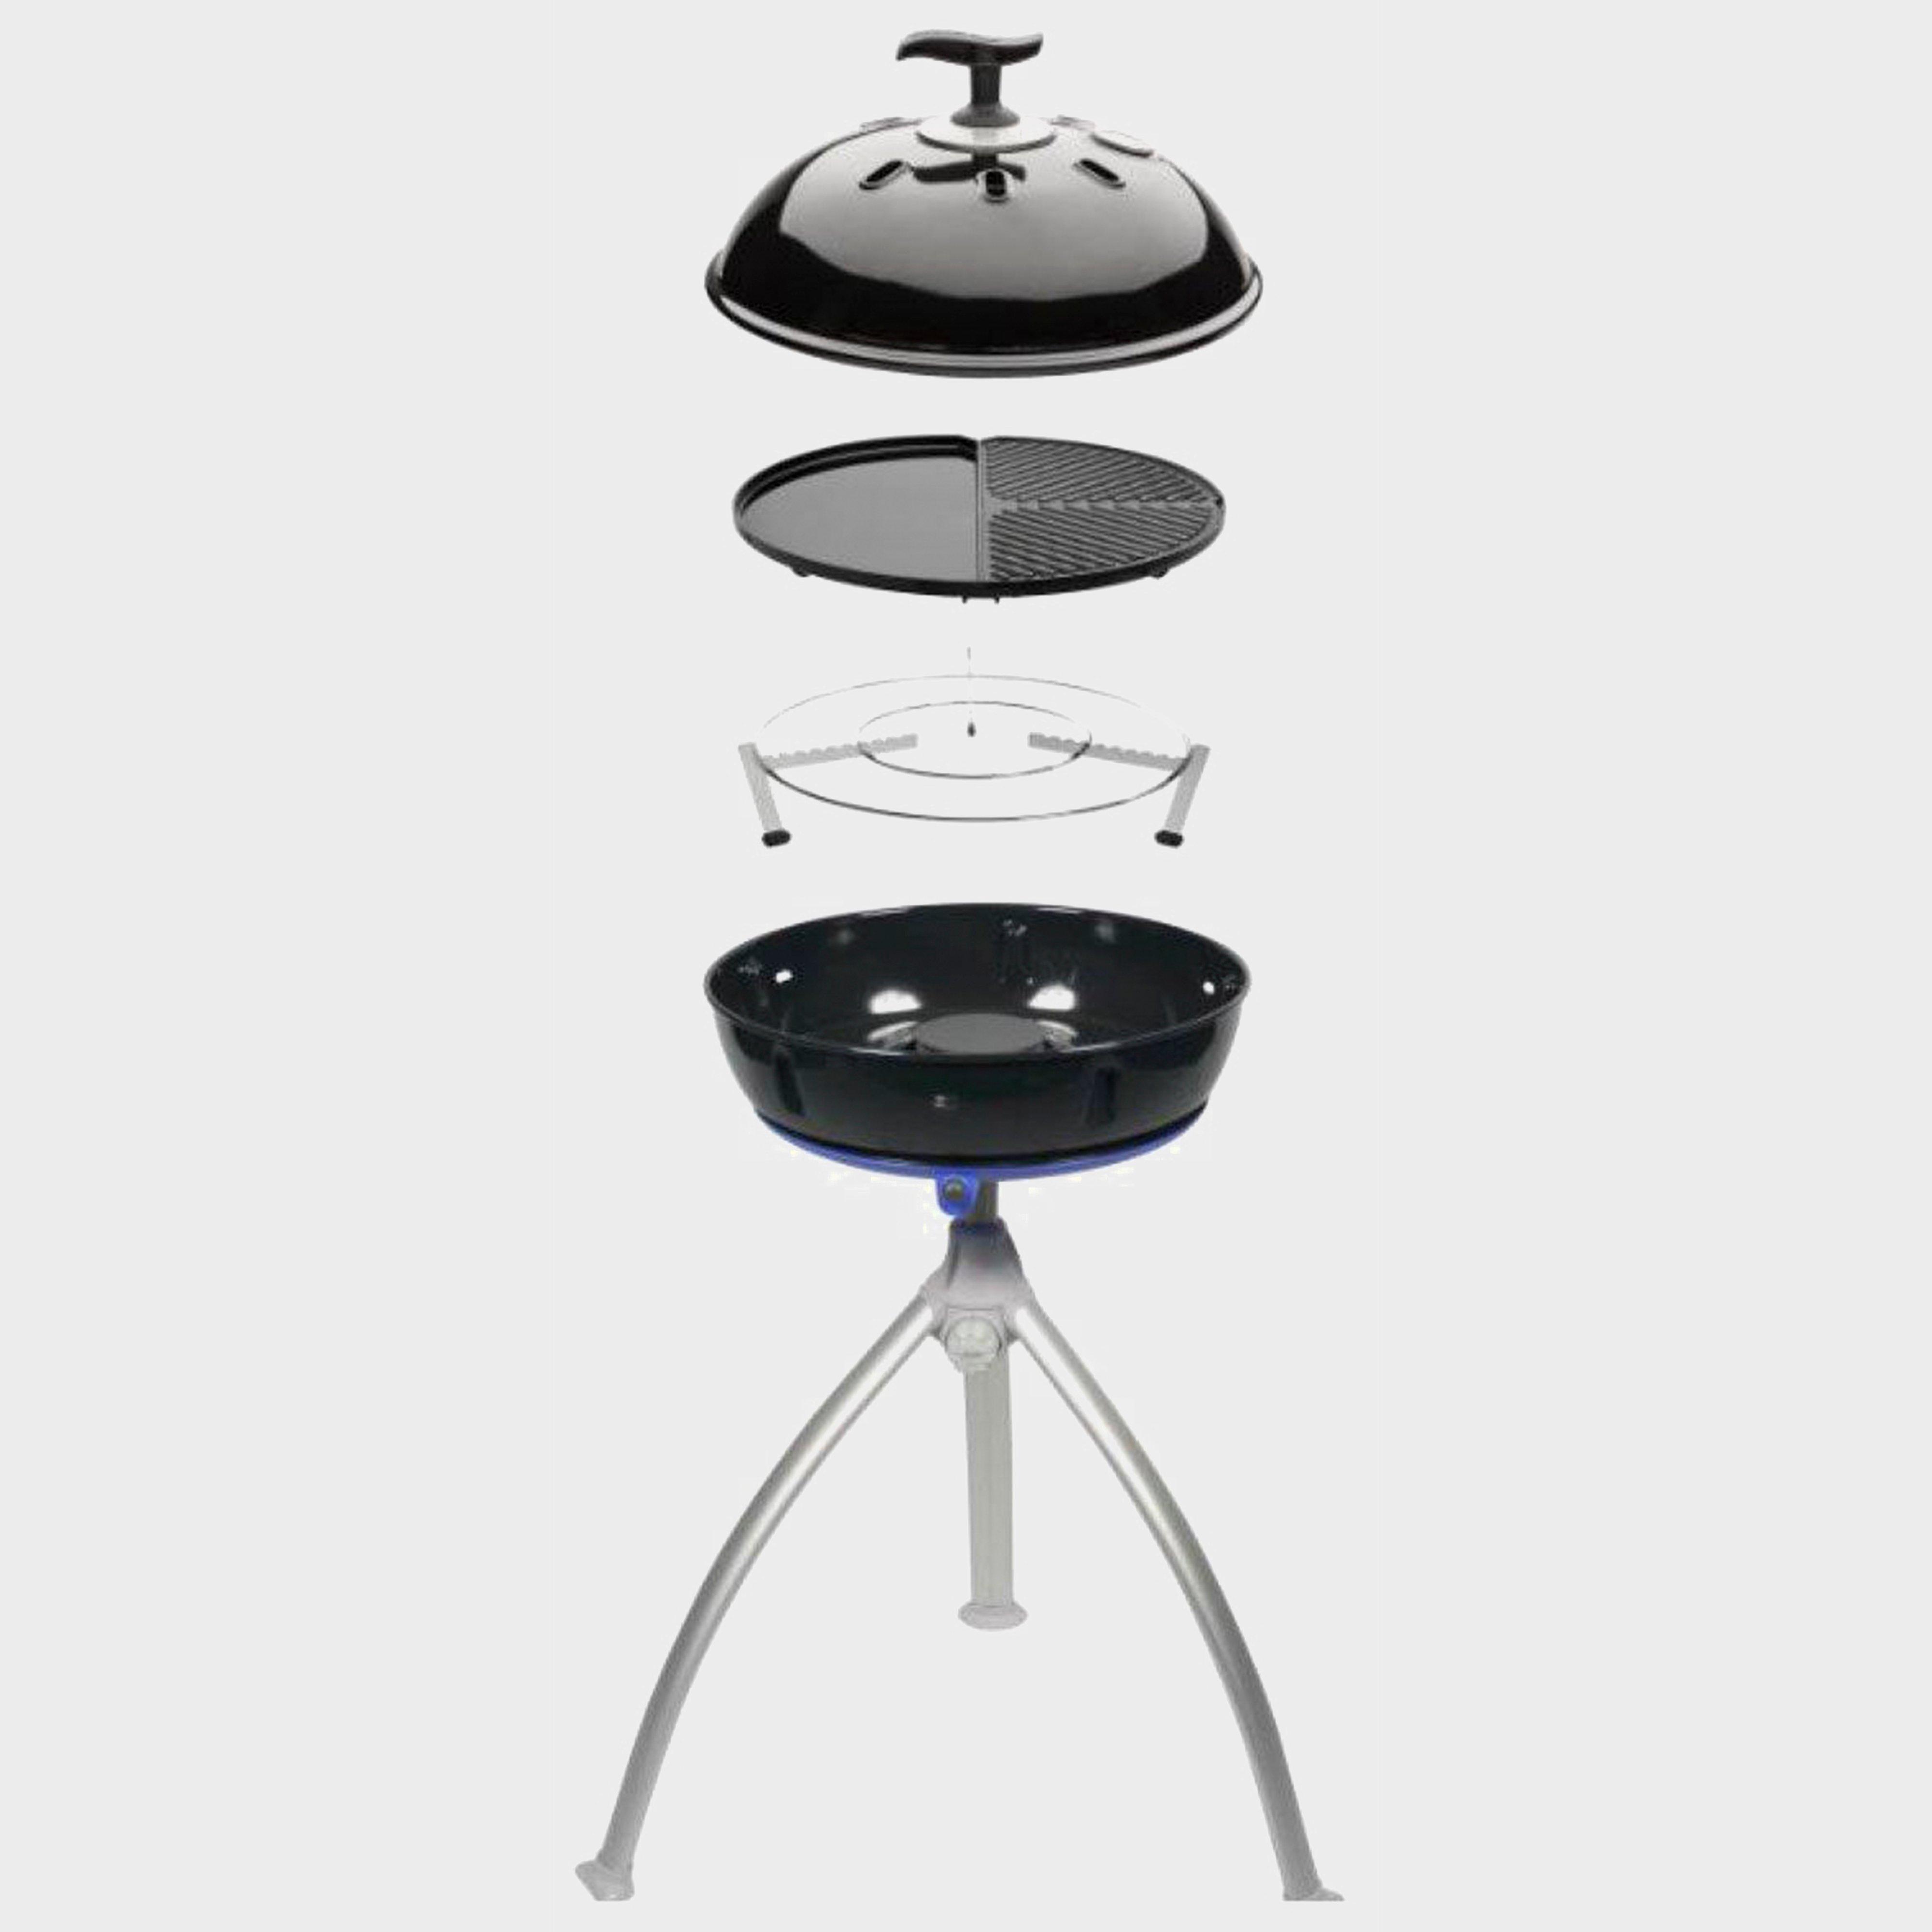 Weber Gourmet BBQ System Cooking Grates Review